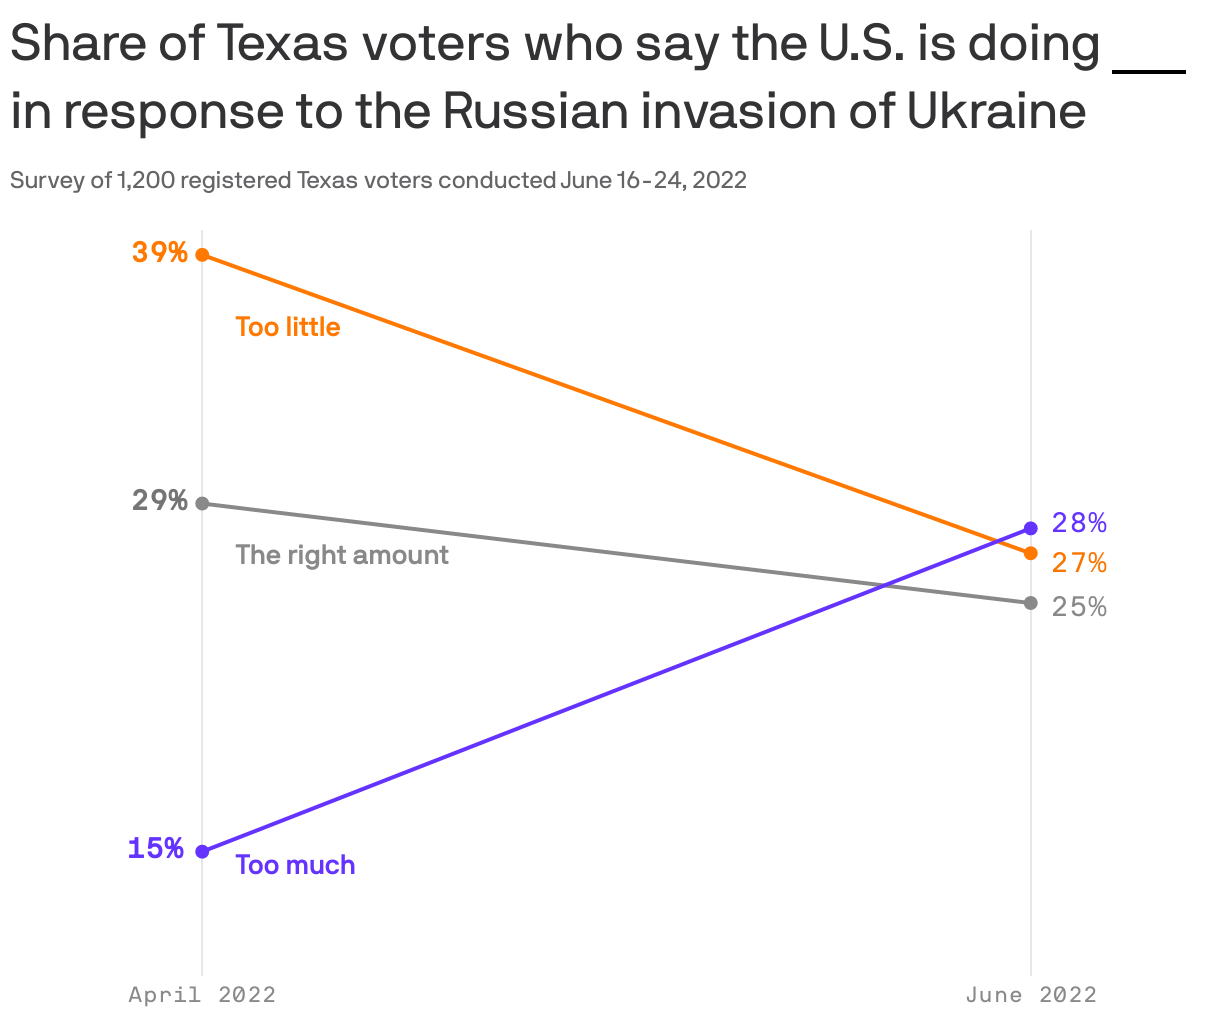 Share of Texas voters who say the U.S. is doing <span style="border-bottom: 2px solid #000;">&nbsp; &nbsp;&nbsp; &nbsp;</span> in response to the Russian invasion of Ukraine